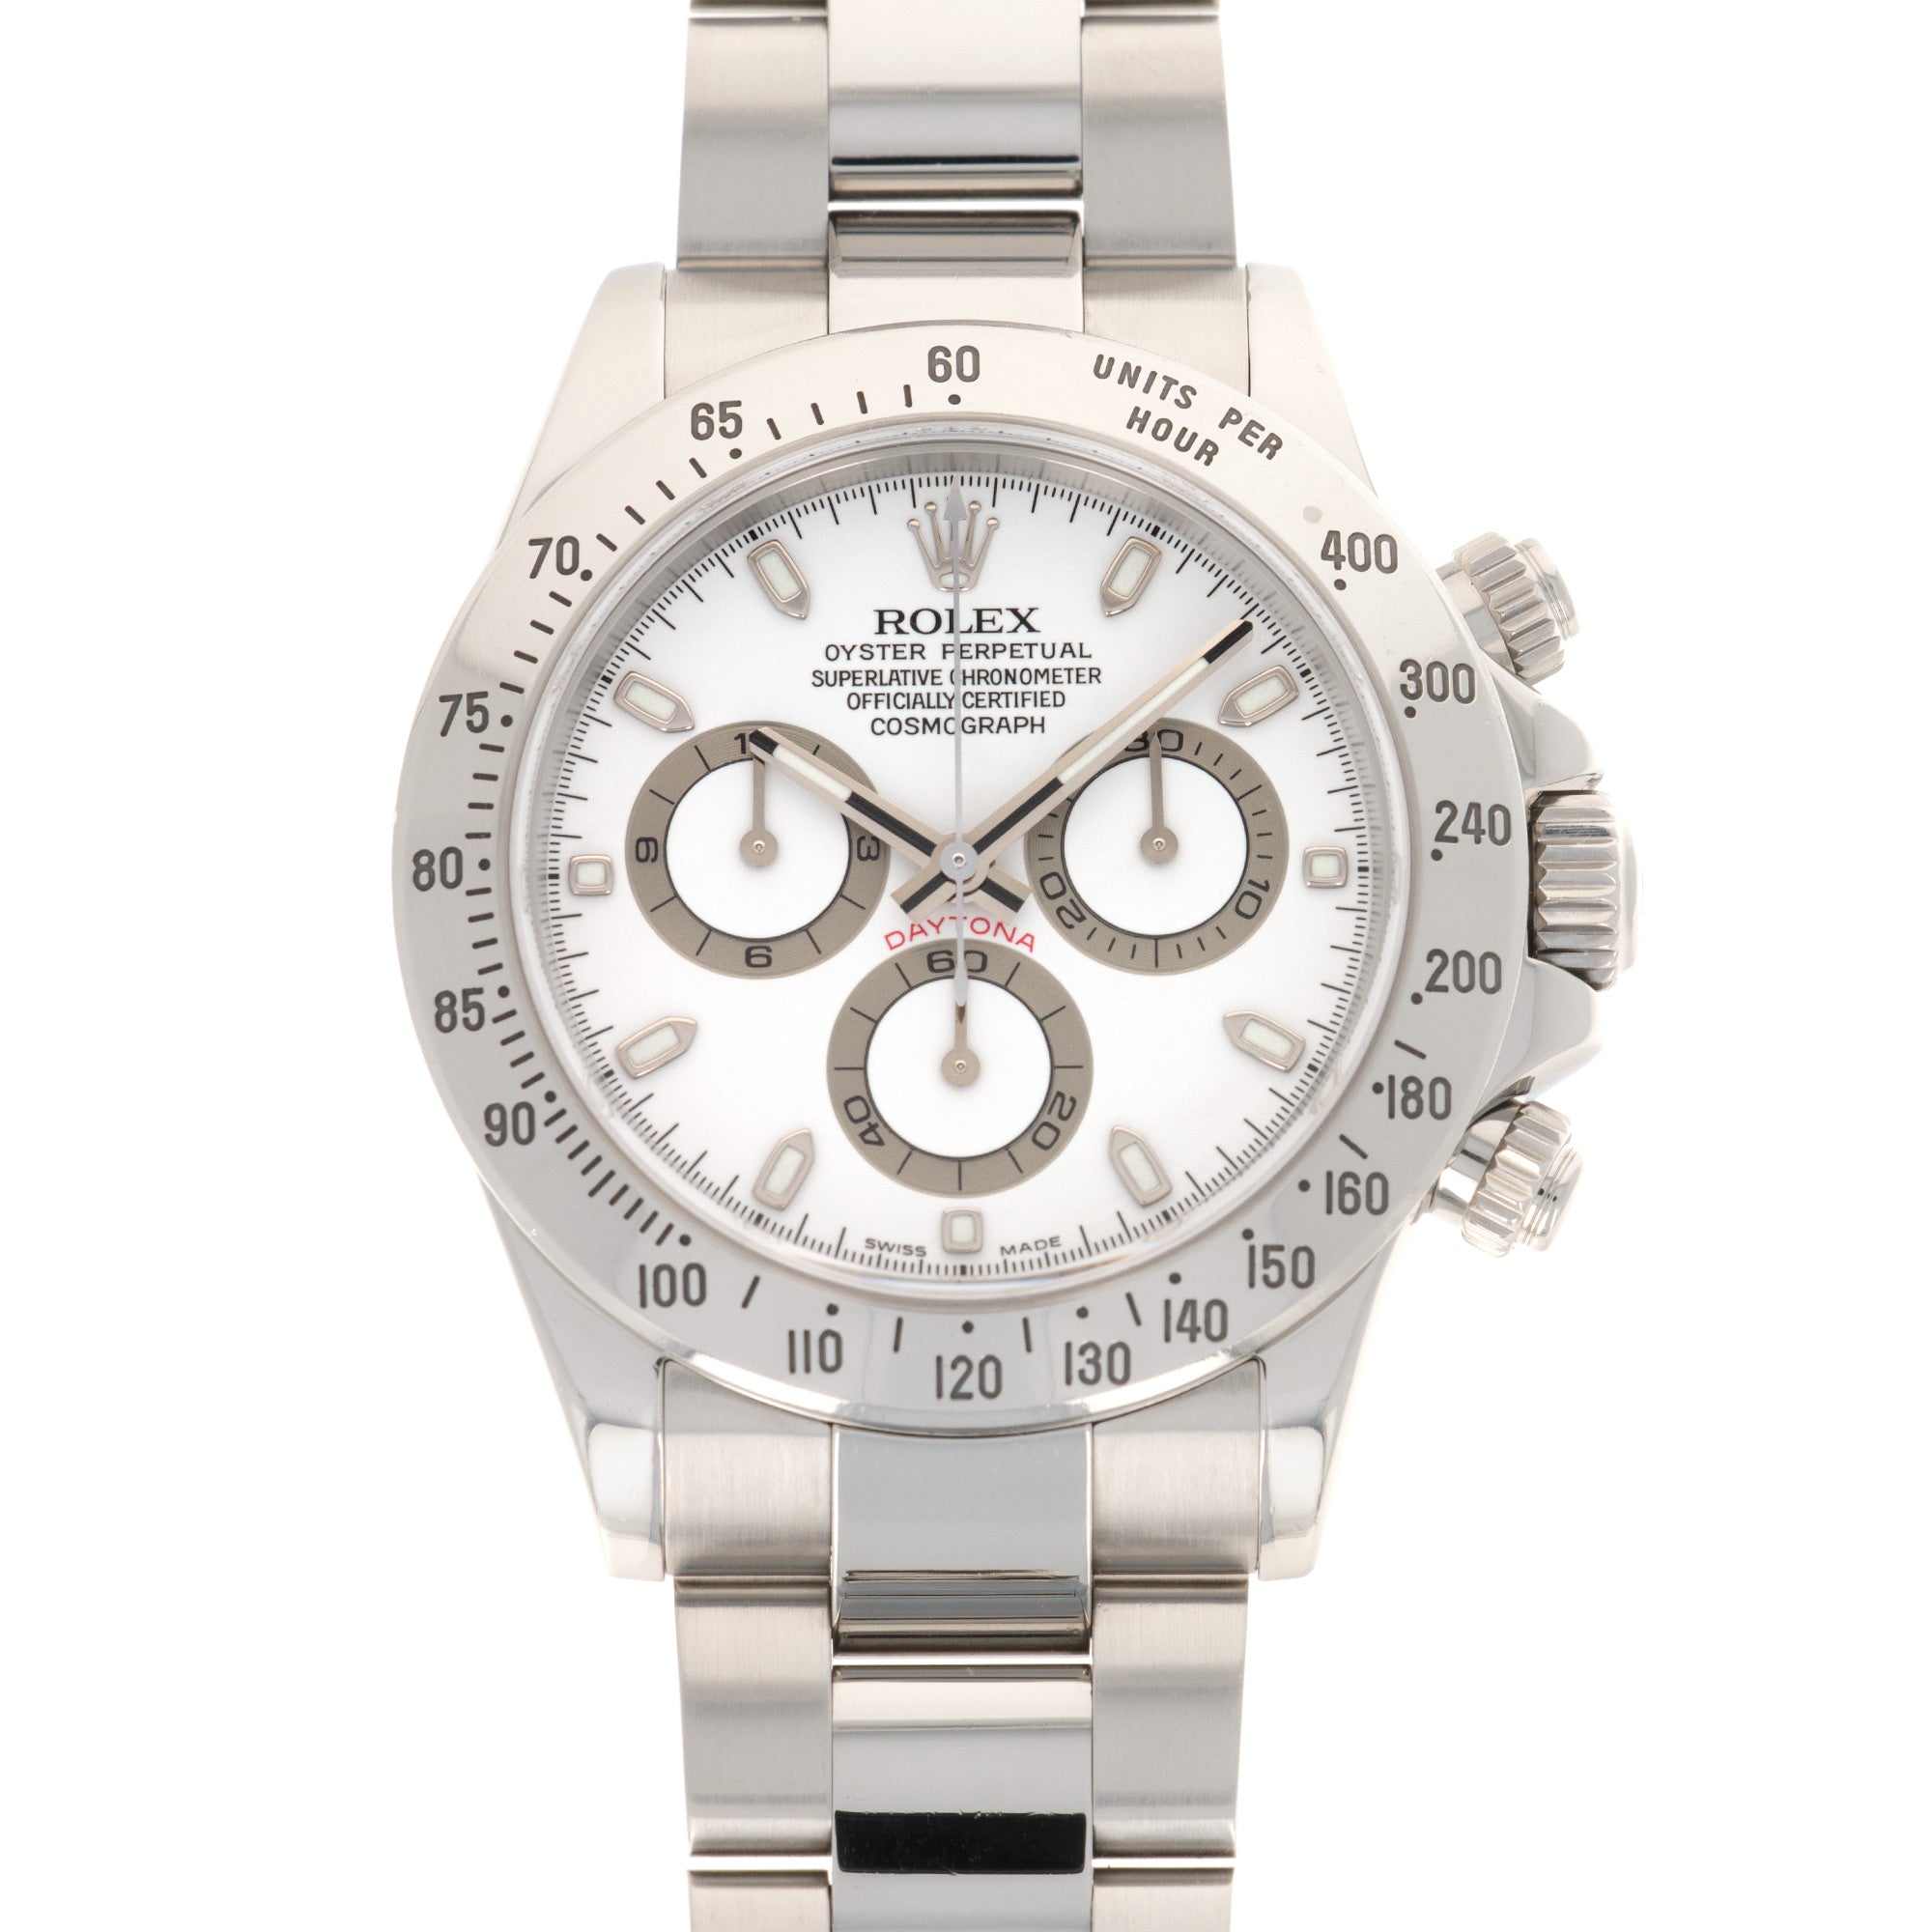 Rolex - Rolex Cosmograph Daytona Watch Ref. 116520 with Original Box and Papers - The Keystone Watches